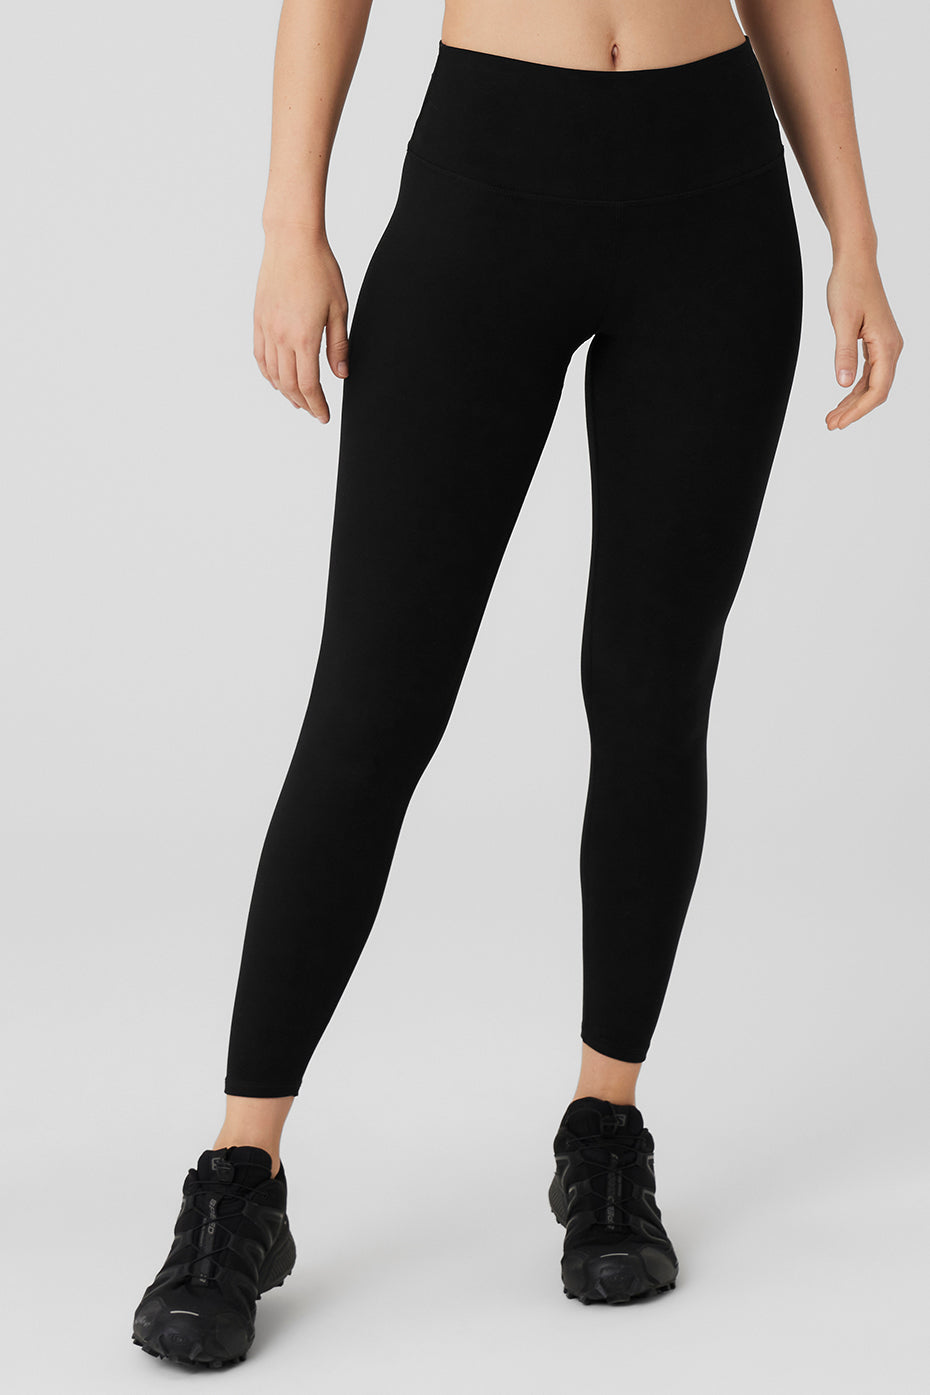  Handful Women's Wi-Thi Mid Waist 7/8 Leggings, Out